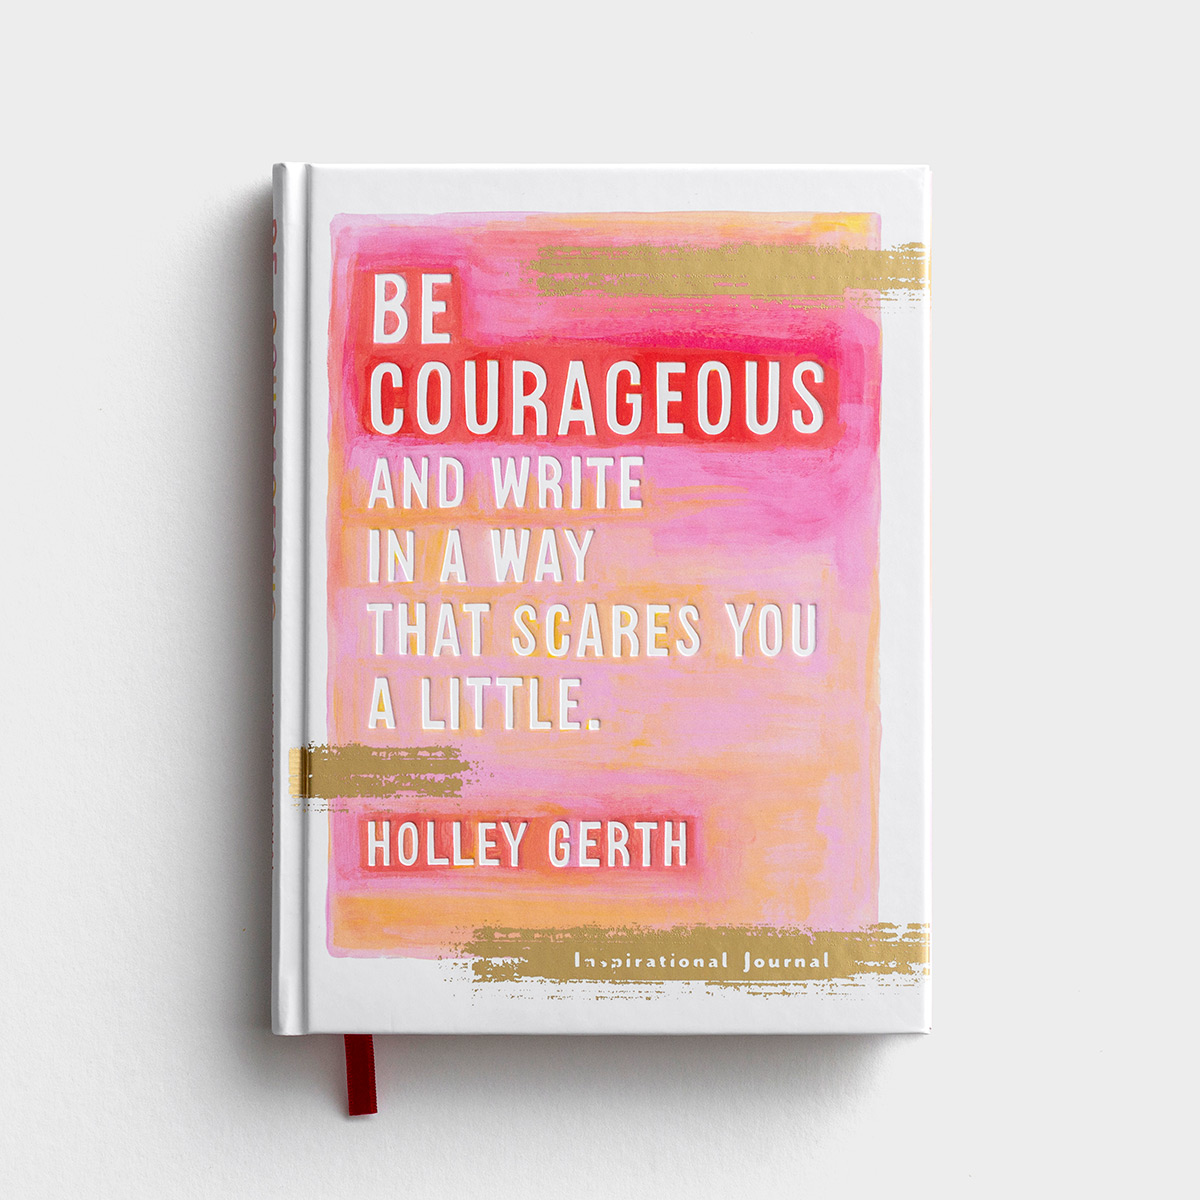 Holley Gerth - Be courageous and Write in a Way That Scares You a Little - Inspirational Journal